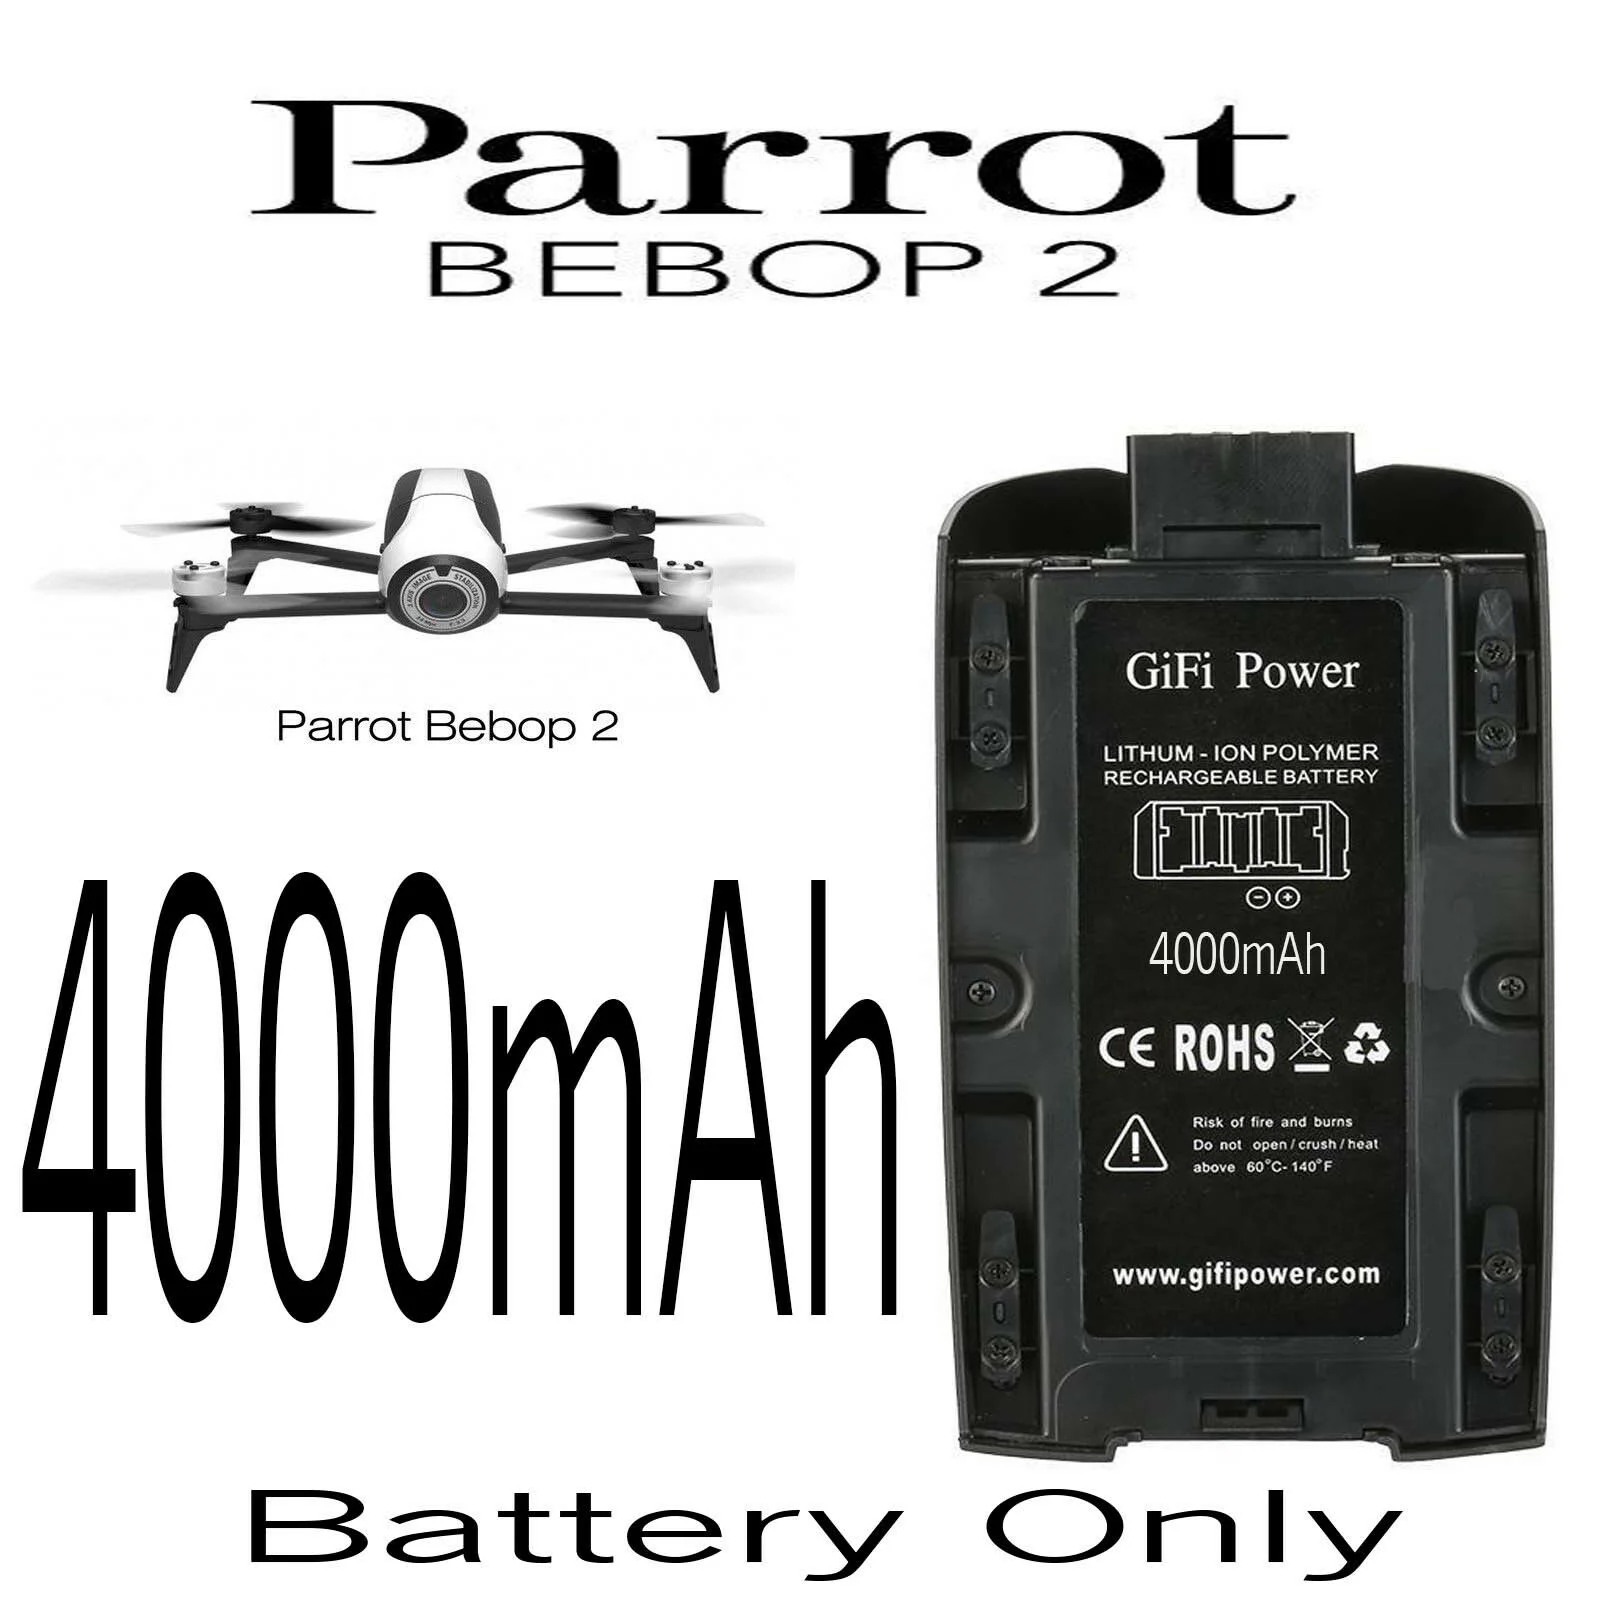 

New Generation 4000mah 11.1v High Capacity Rechargeable Battery Pack For Parrot Bebop 2 Drone Large Capacity Battery